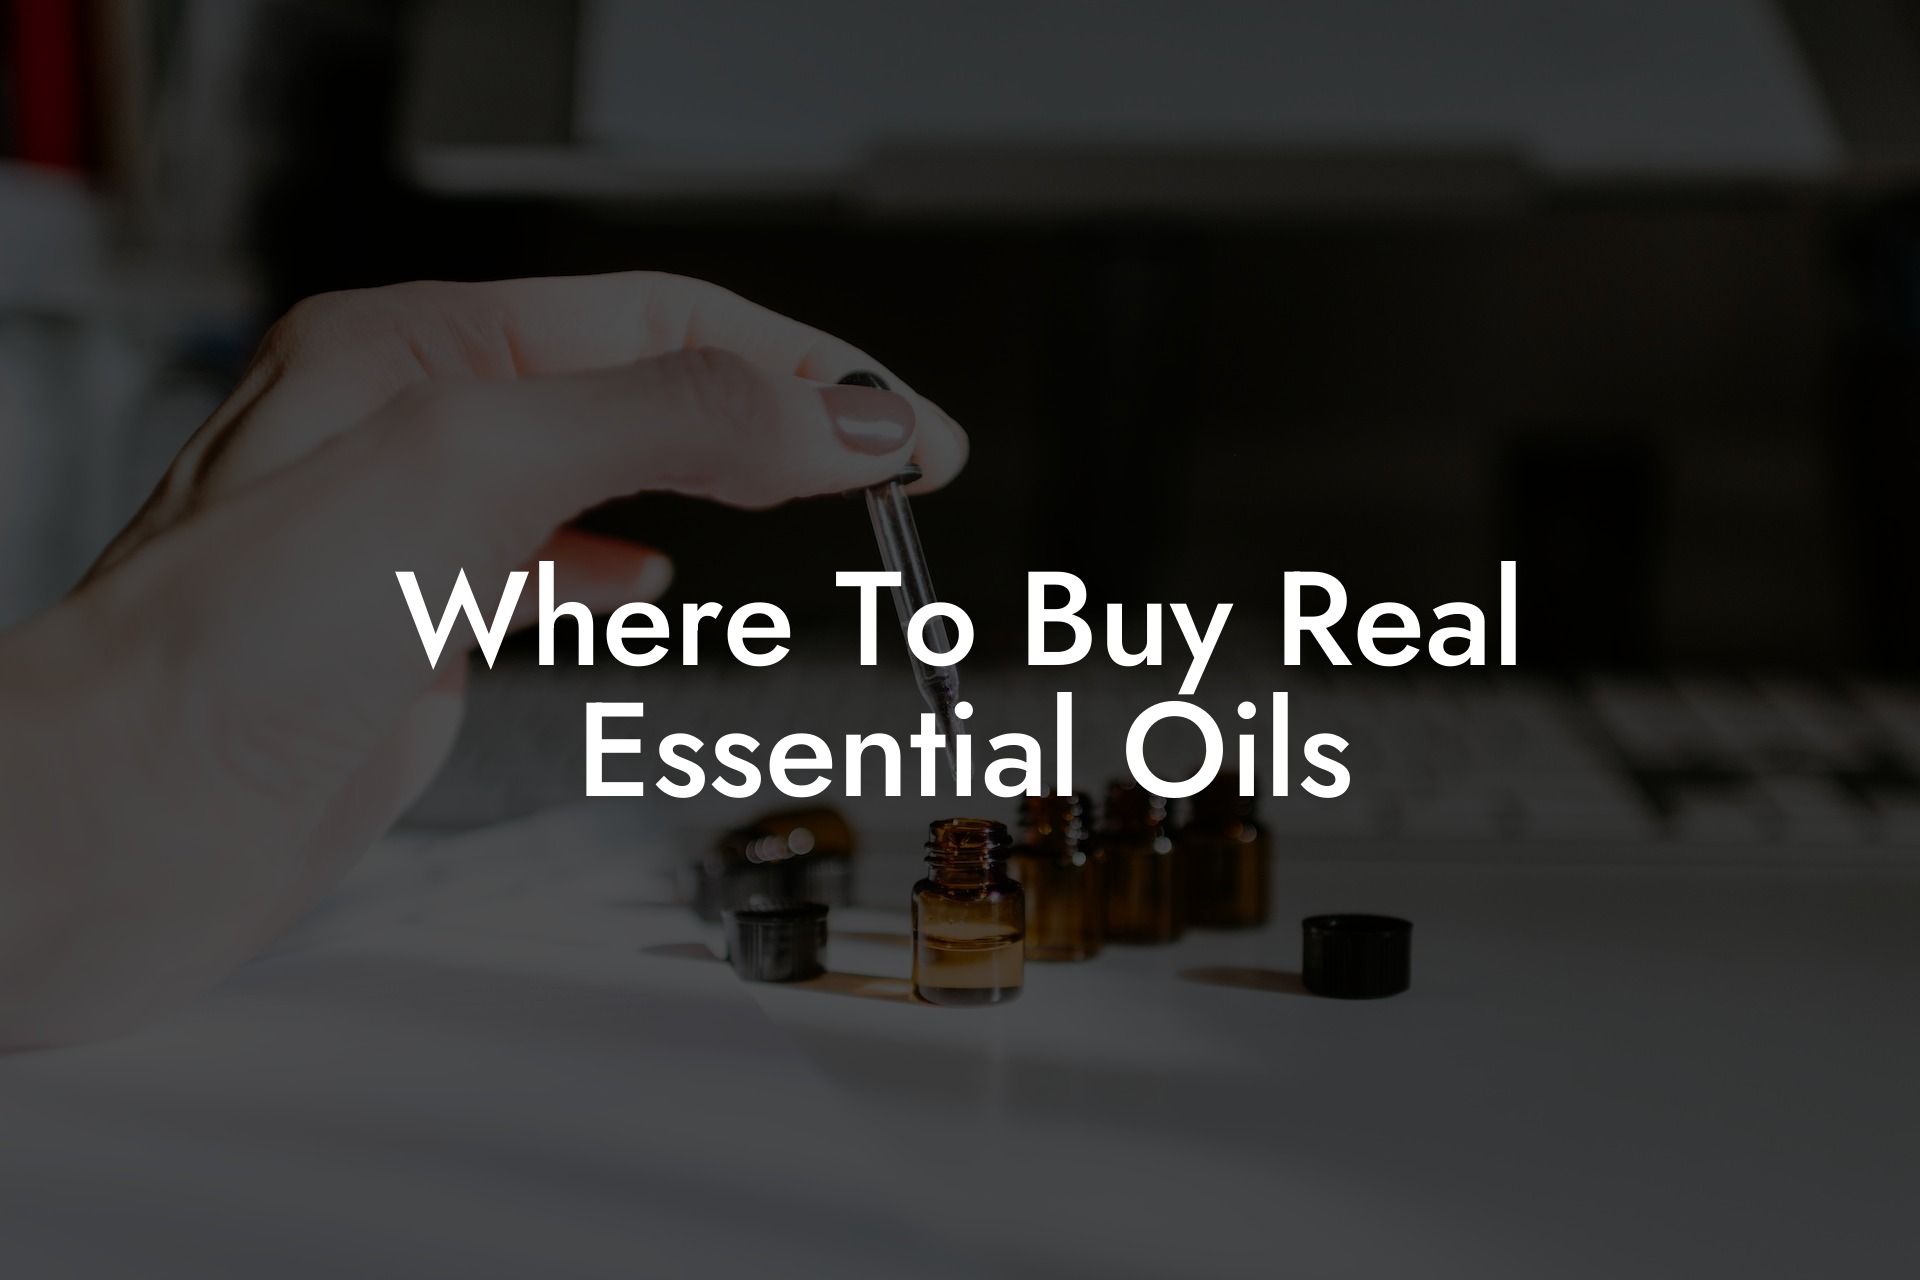 Where To Buy Real Essential Oils